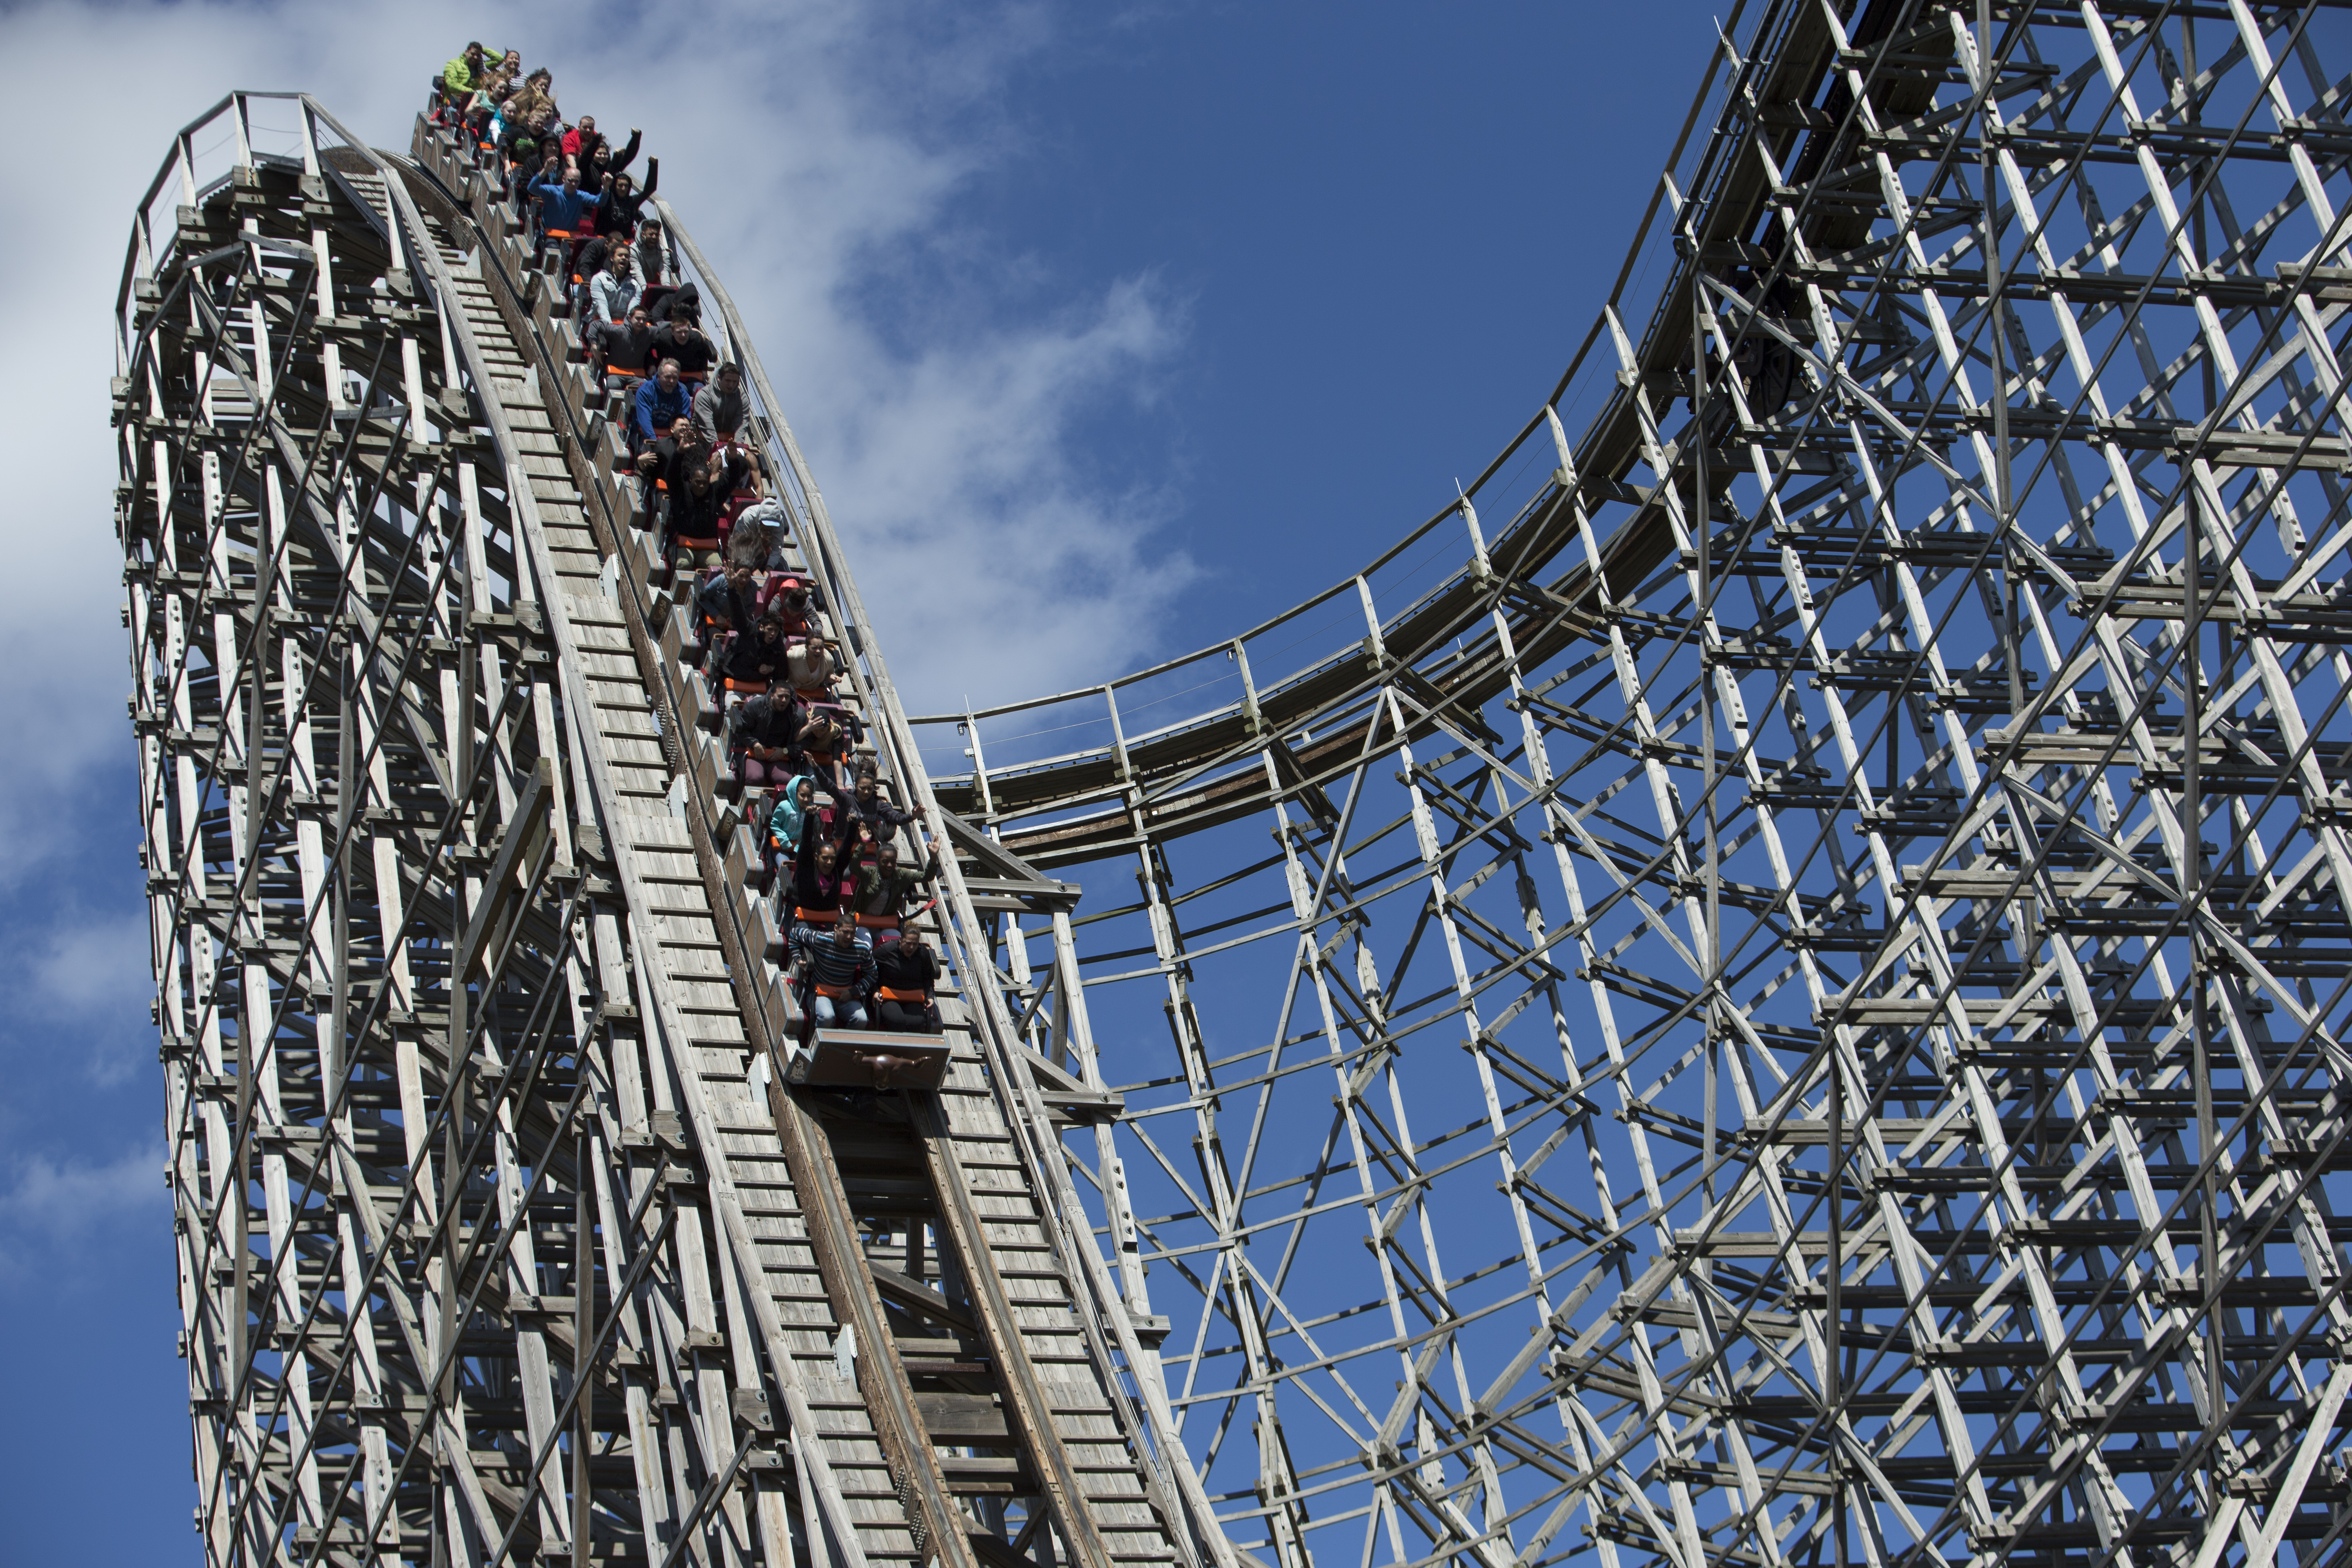 El Toro reopening at Six Flags Great Adventure after 10-month closure 